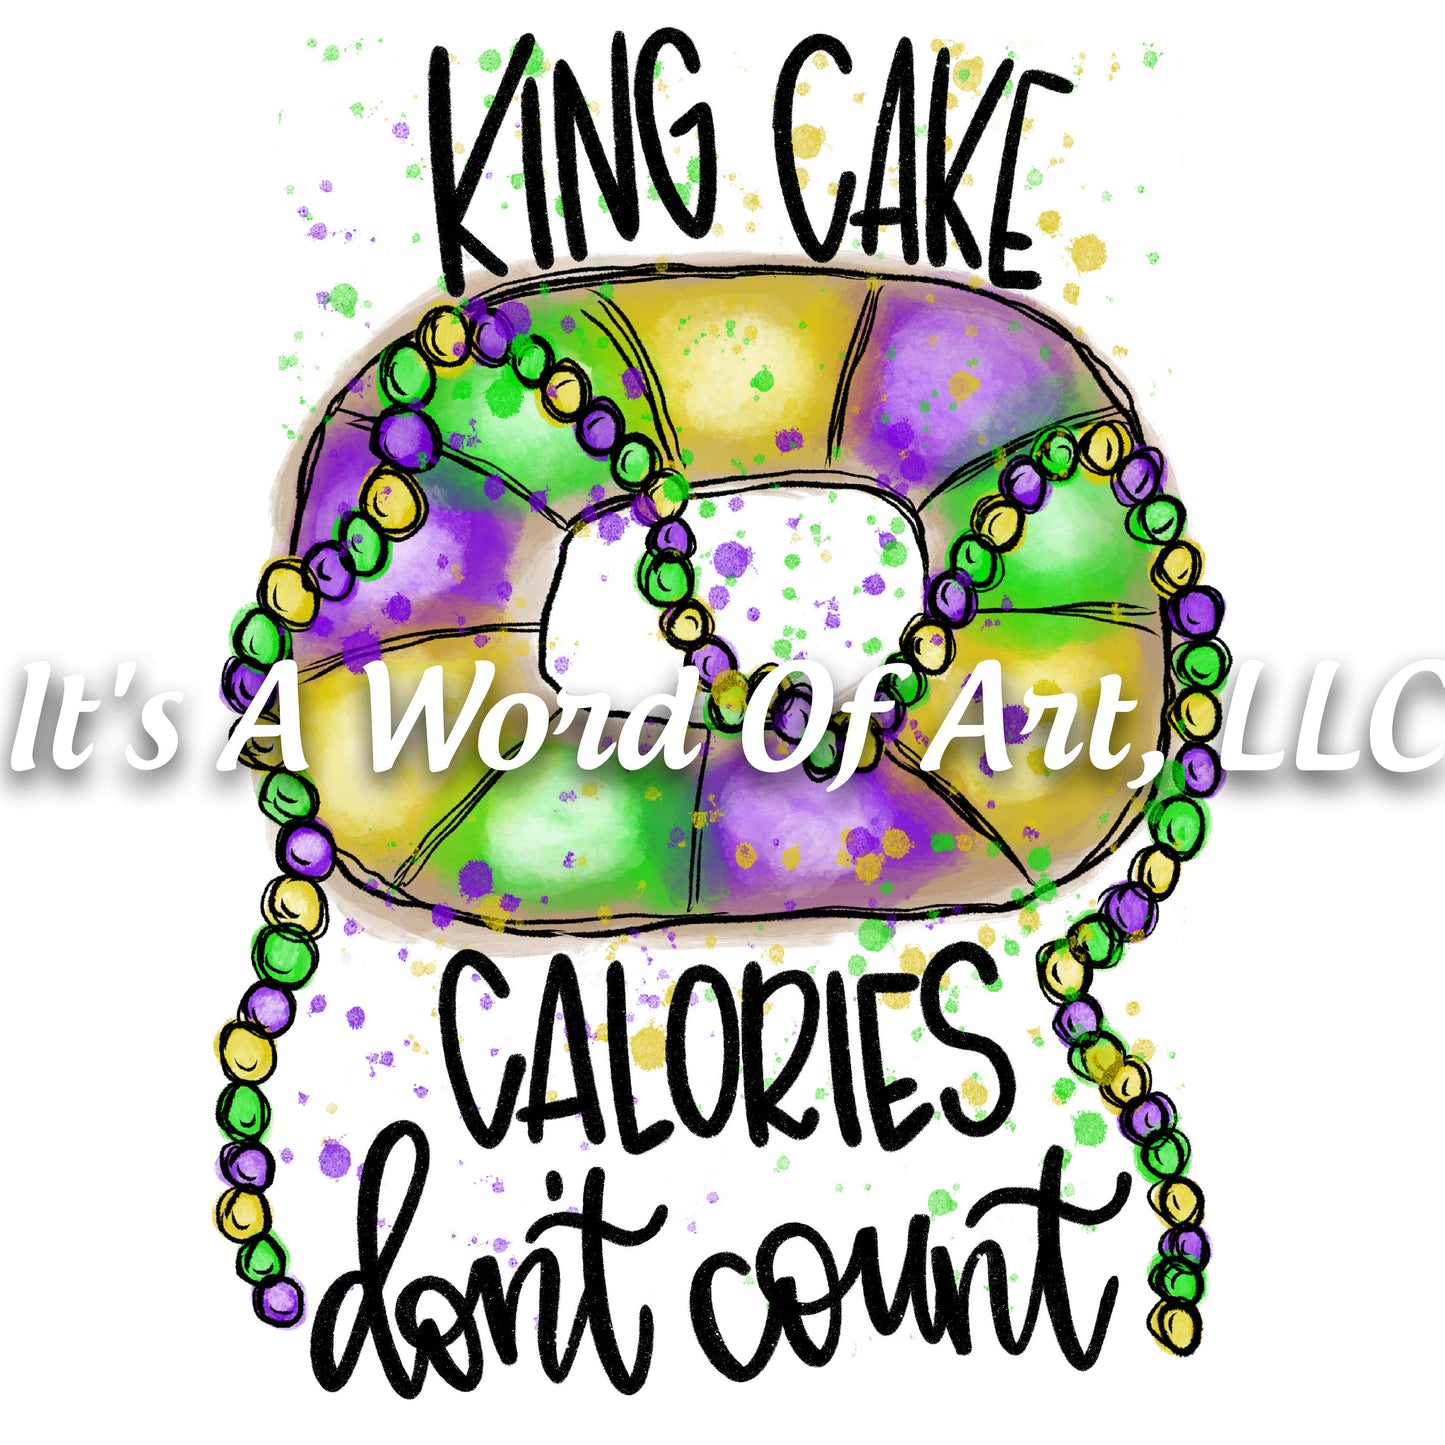 Mardi Gras 9 - King Cake Calories Don't Count - Sublimation Transfer Set/Ready To Press Sublimation Transfer/Sublimation Transfer